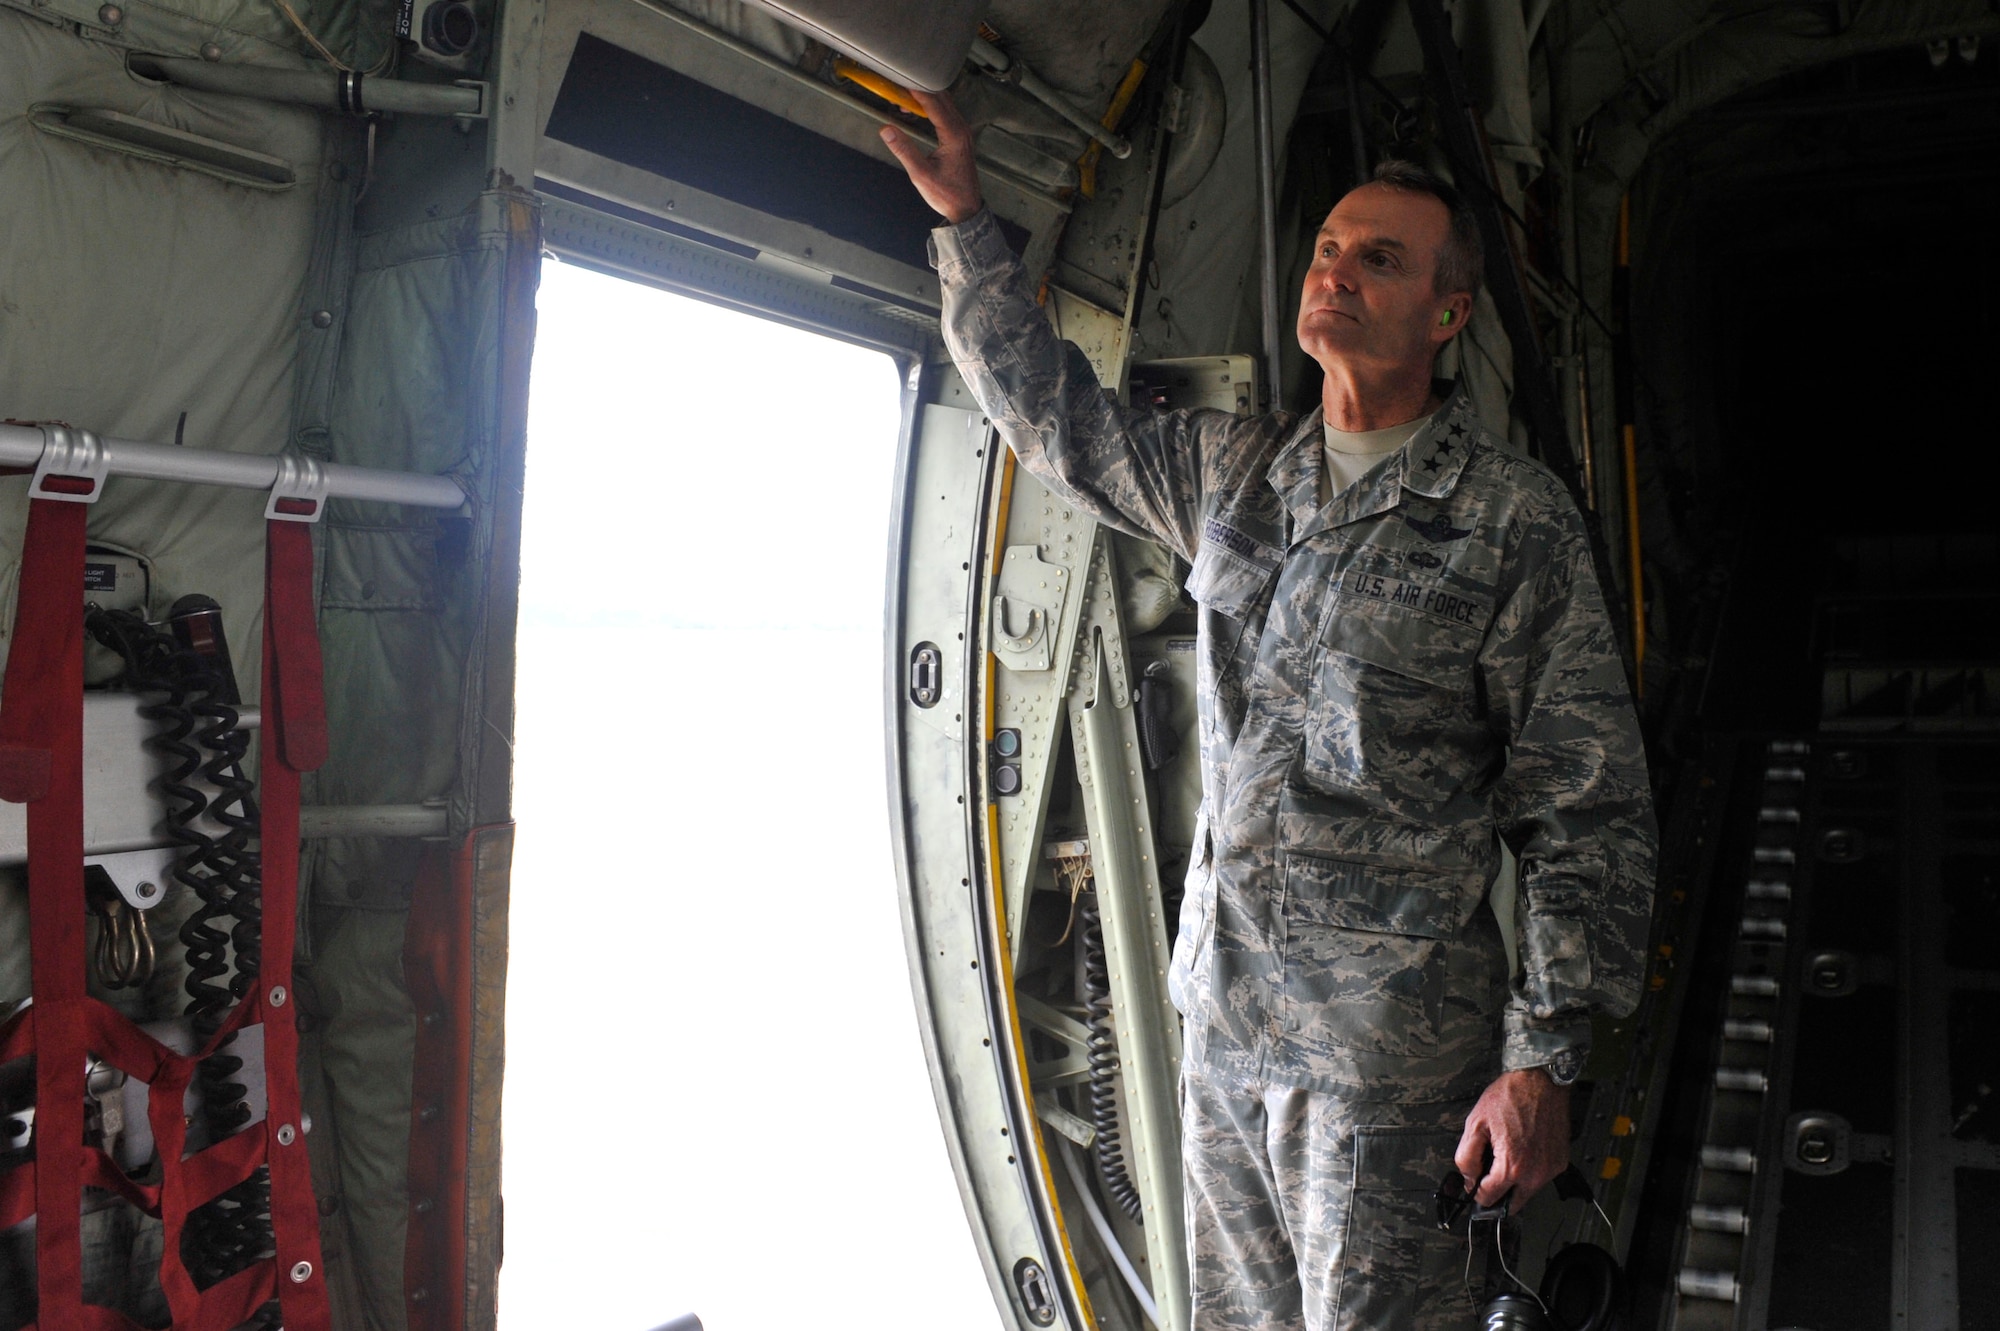 Lt. Gen. Darryl Roberson, commander of Air Education and Training Command, tours the inside of a C-130J Super Hercules Aug. 22, 2016, at Little Rock Air Force Base, Ark. During his tour, Roberson spoke to crew chiefs who recently received a Black Letter Initial which is earned when there are zero discrepancies during a flight. (U.S. Air Force photo by Staff Sgt. Regina Edwards)